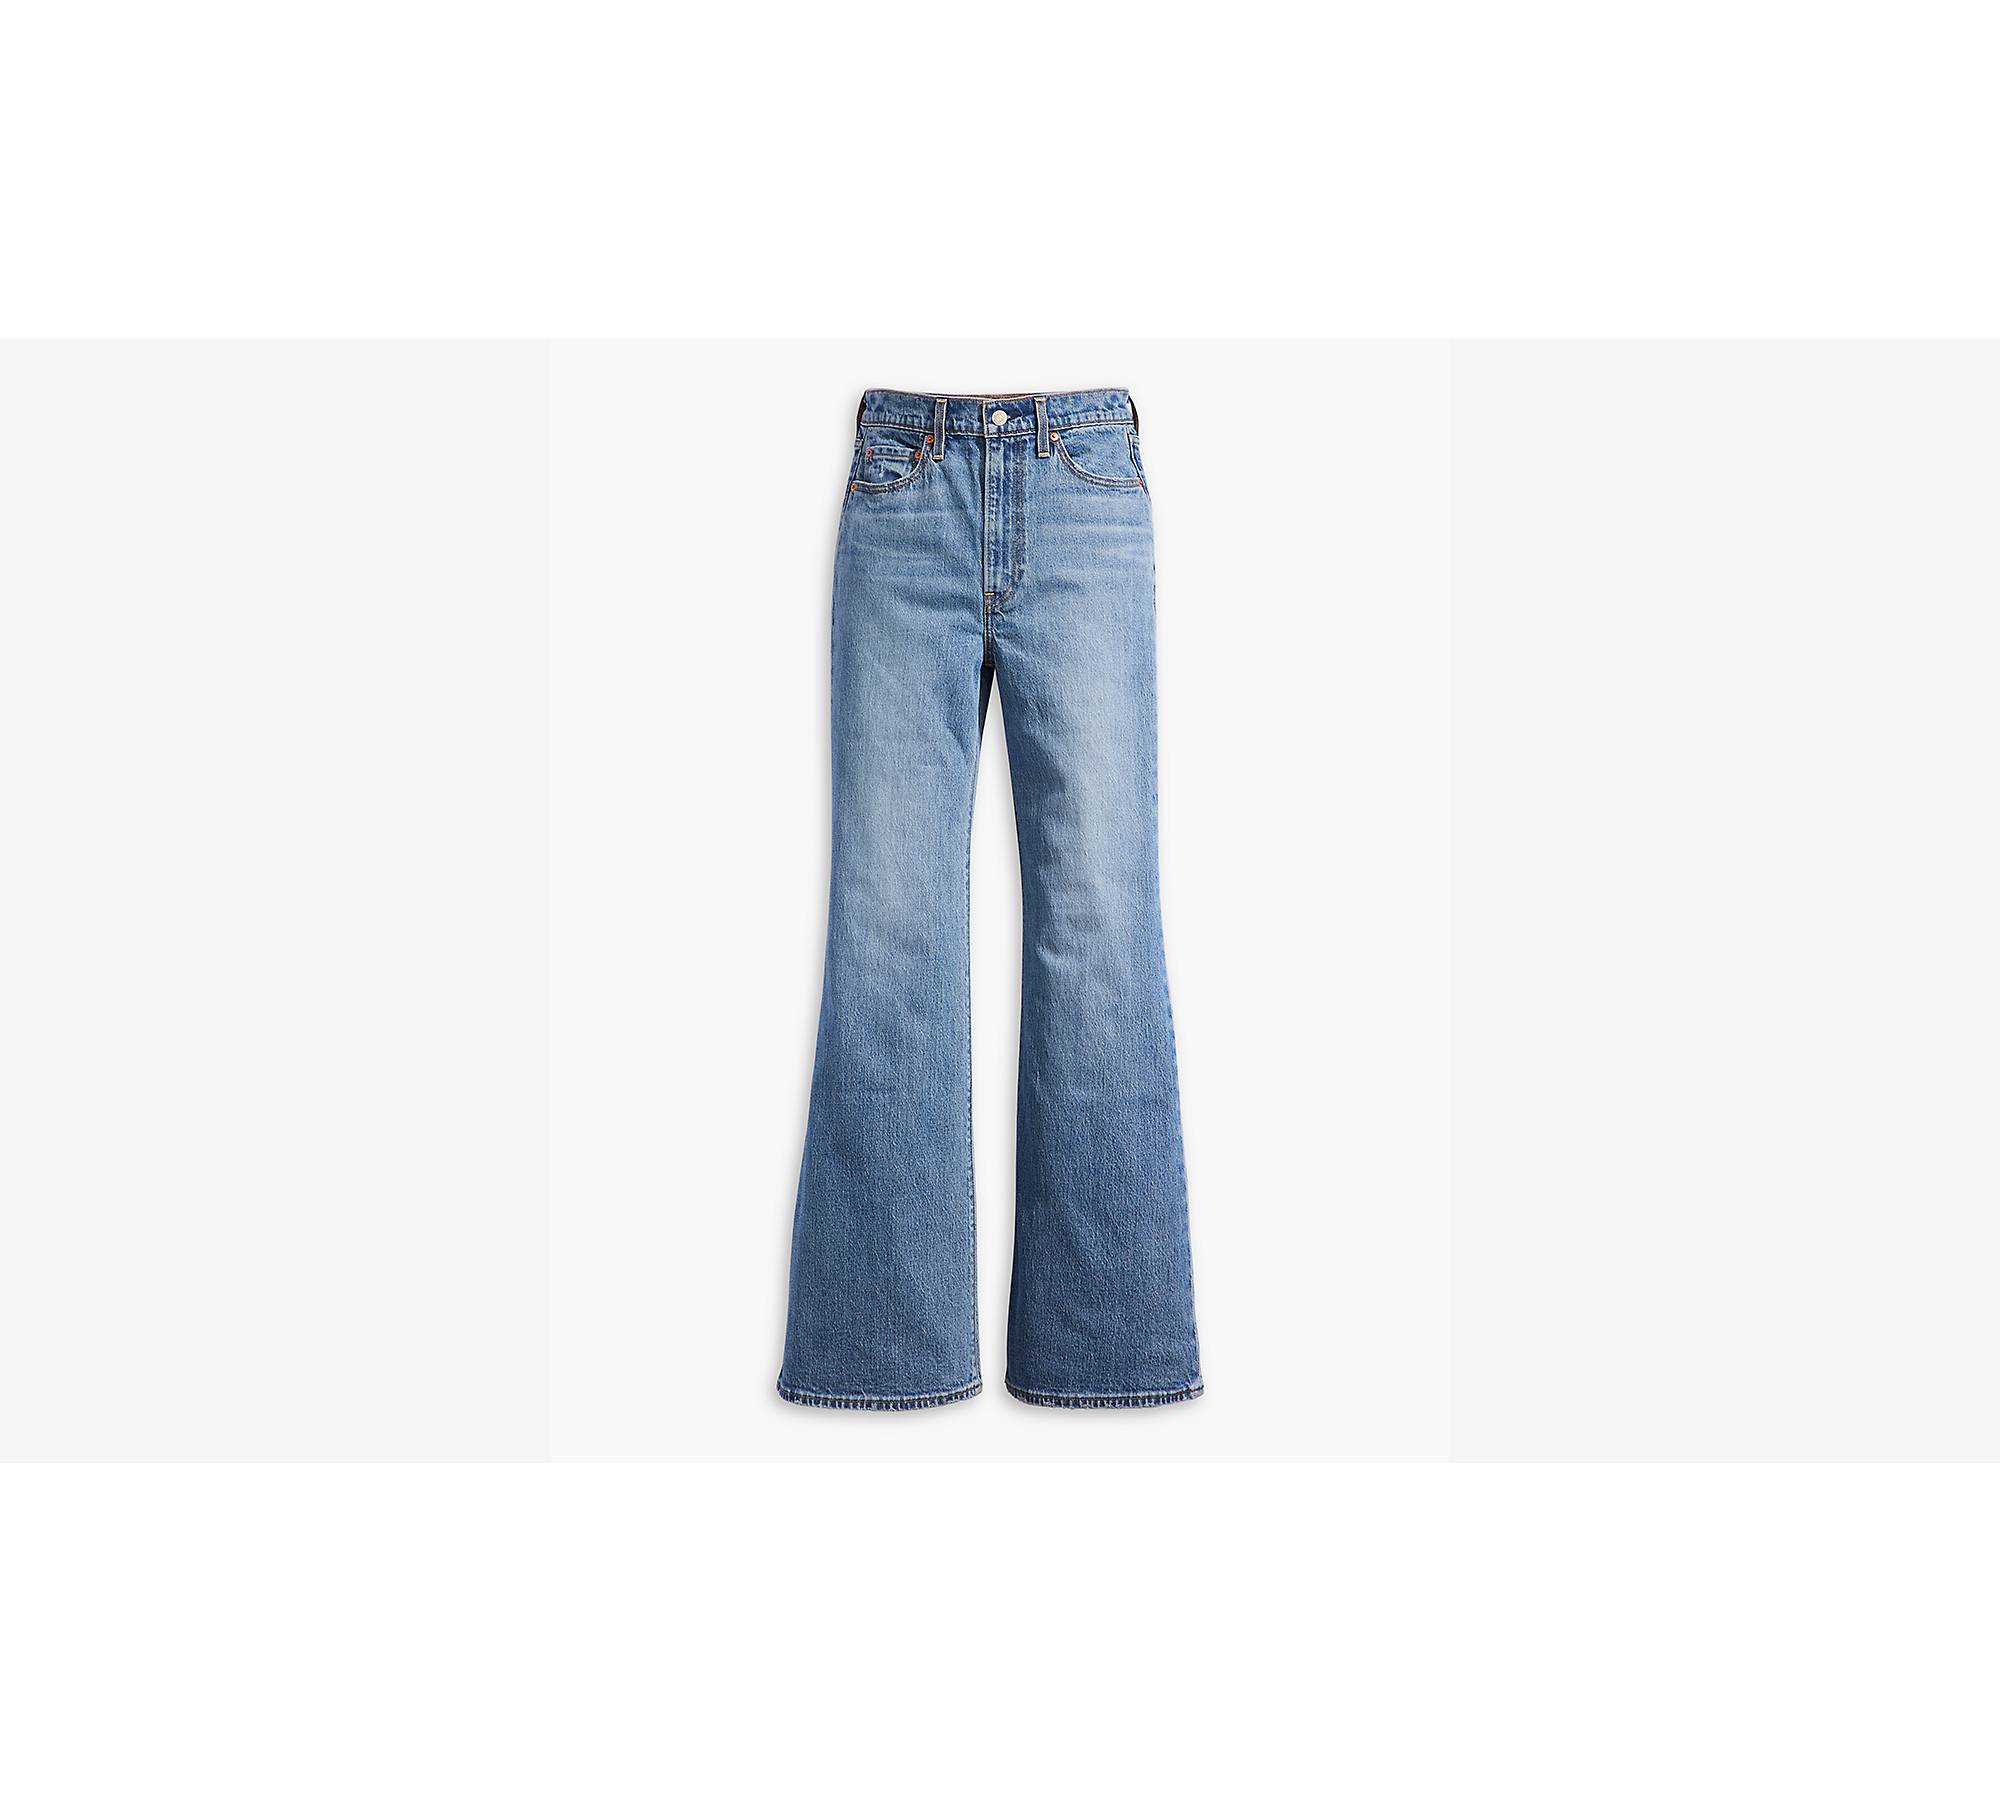 Ribcage Bell Jeans - Blue | Levi's® GB